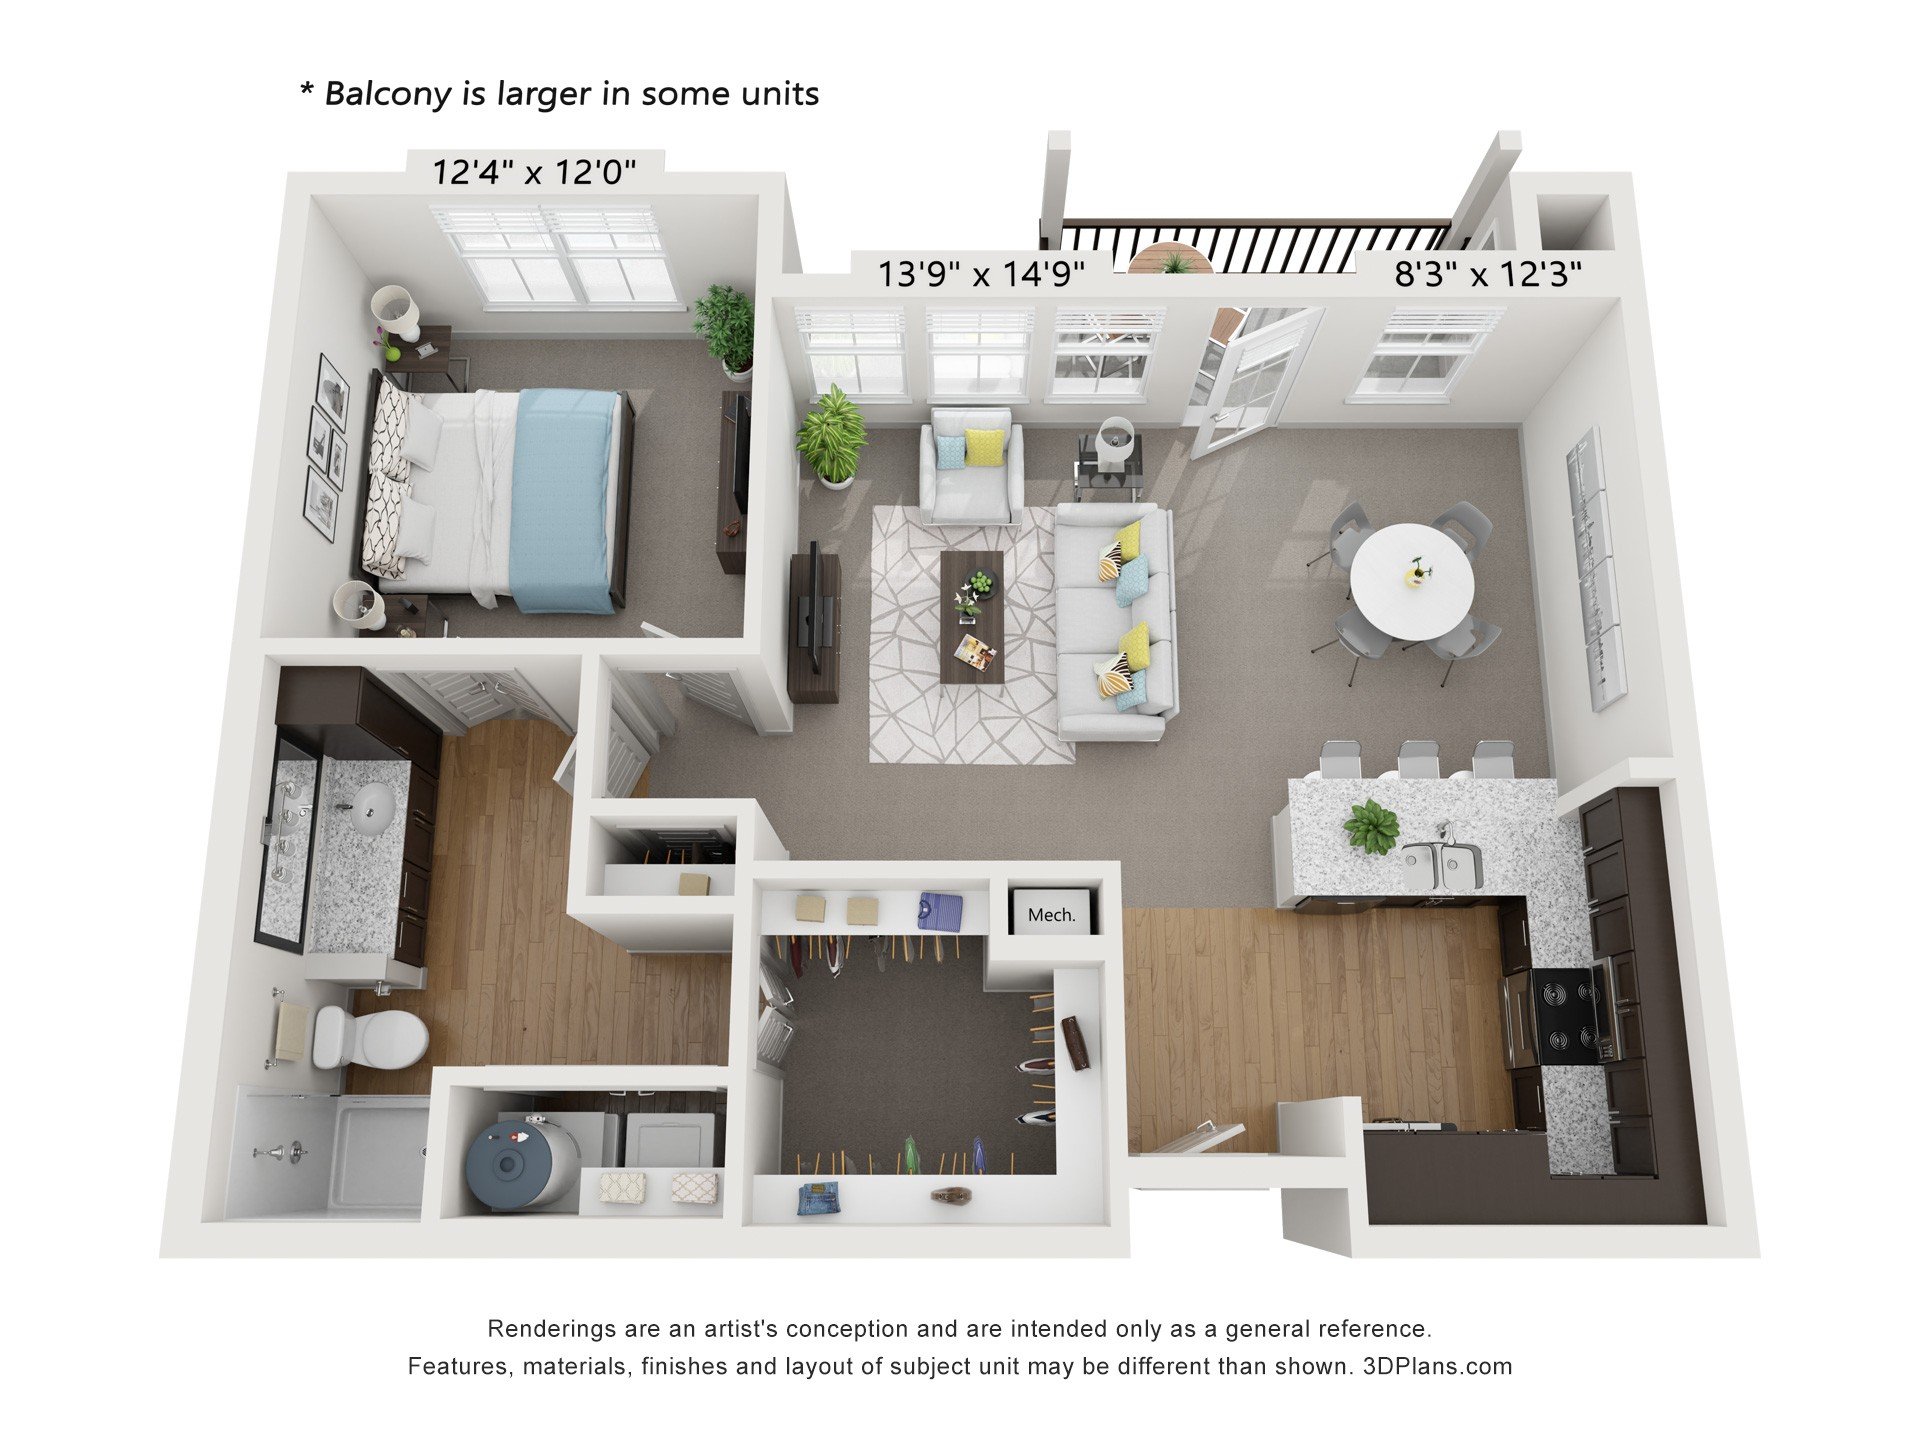 a 1 bedroom floor plan with a bathroom and a living room